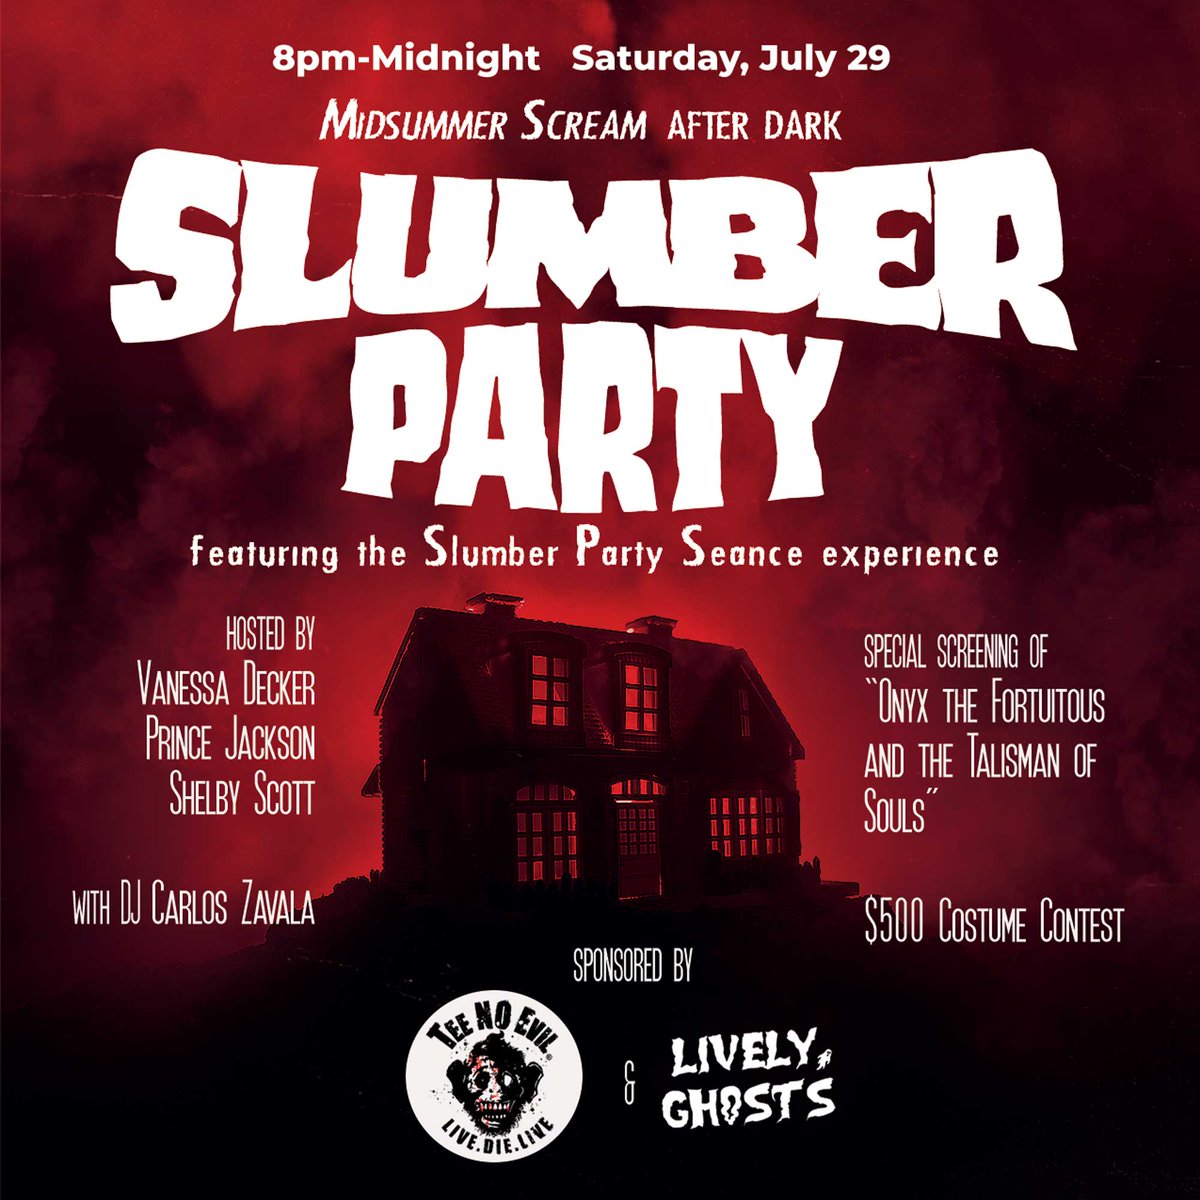 SLUMBER PARTY is the theme of our party, Saturday, July 29 after the Midsummer Scream showfloor closes. Live DJ, $500 costume contest, special immersive experience and... I dunno...
blackcatorange.ticketspice.com/midsummer-scre…